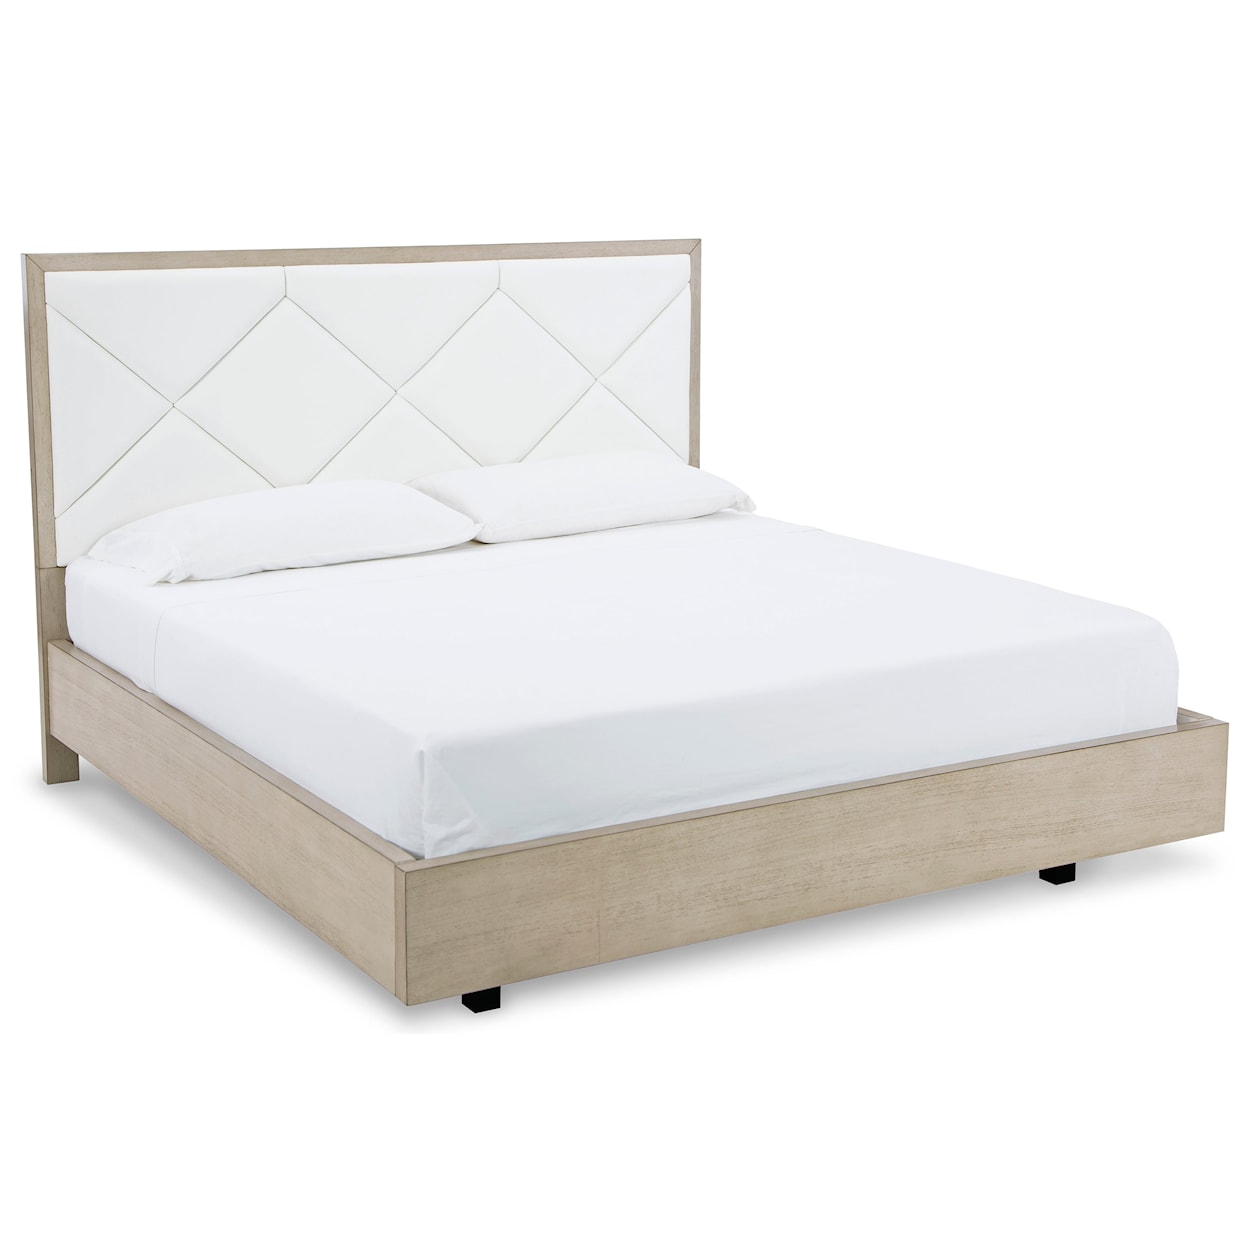 Signature Design by Ashley Furniture Wendora Queen Upholstered Bed